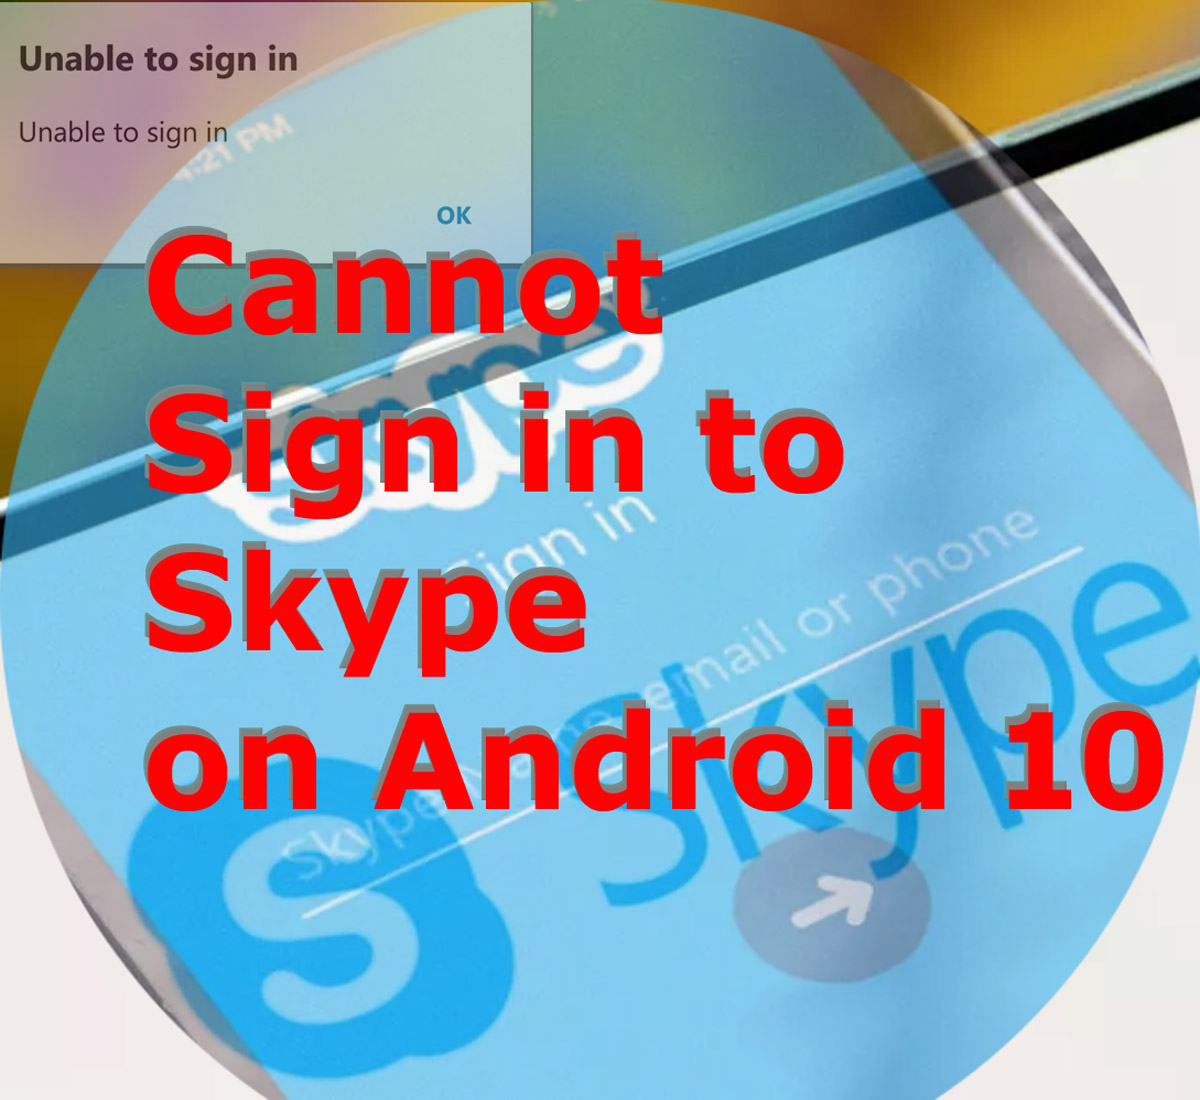 unable to sign into skype from tablet